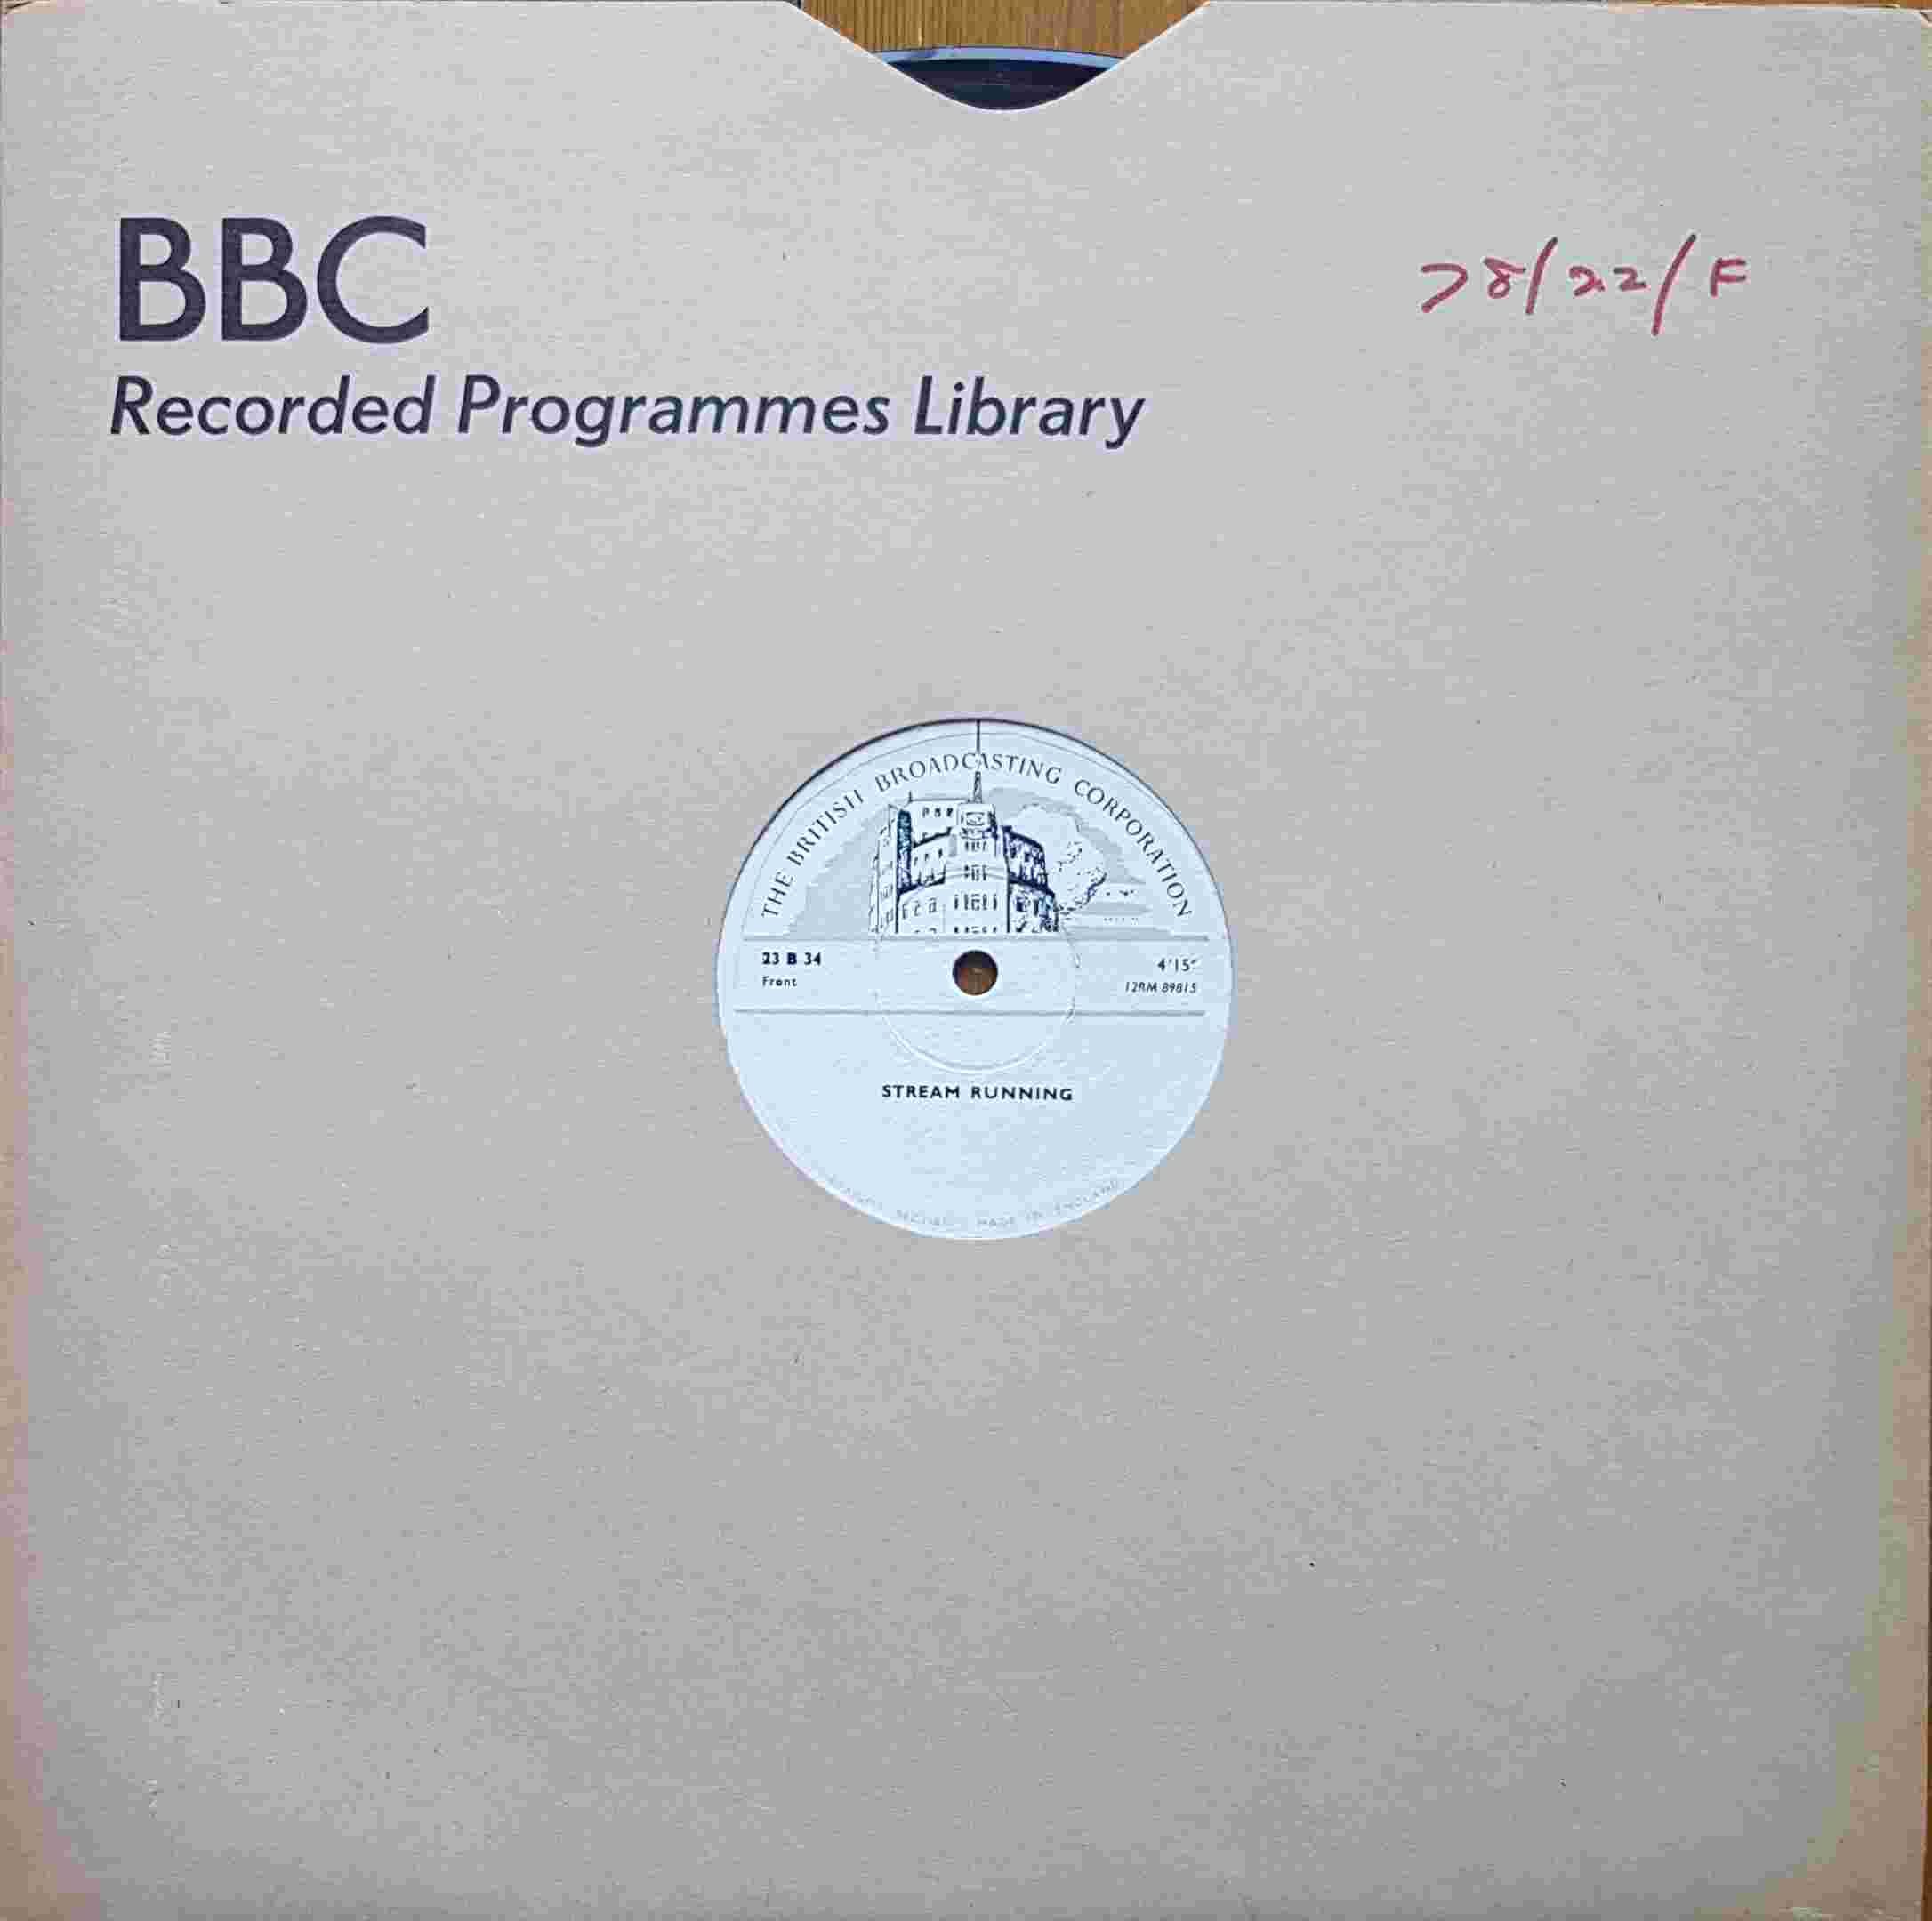 Picture of 23 B 34 Stream running by artist Not registered from the BBC records and Tapes library